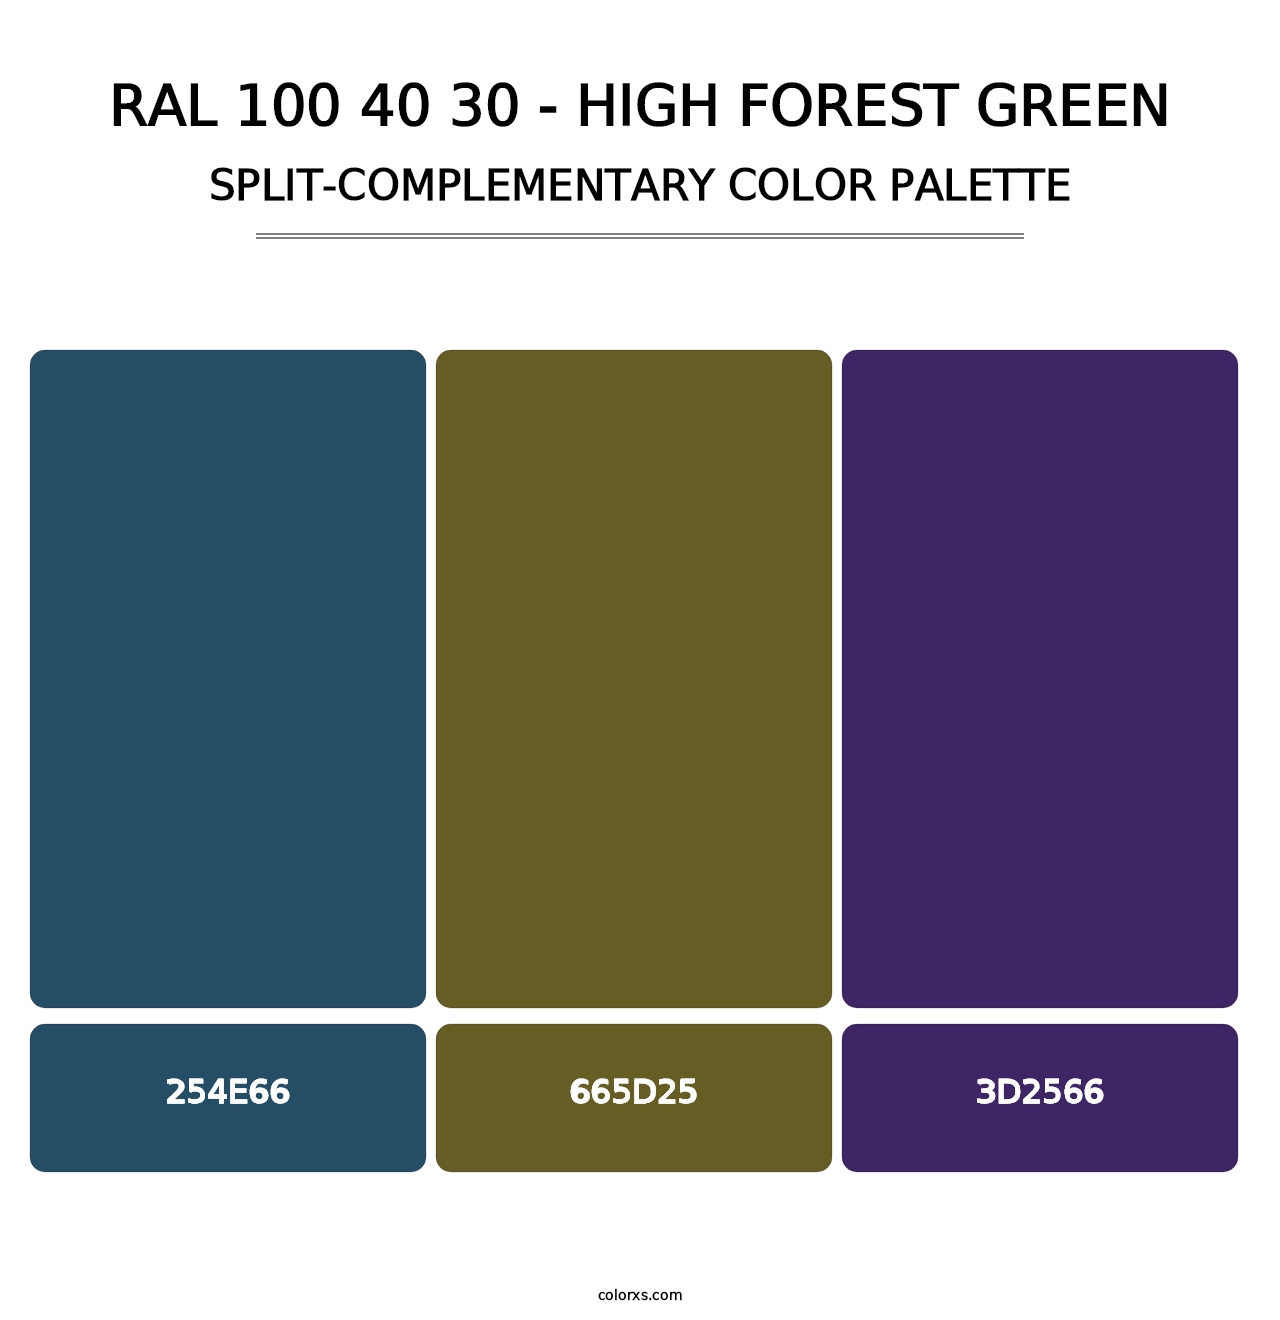 RAL 100 40 30 - High Forest Green - Split-Complementary Color Palette